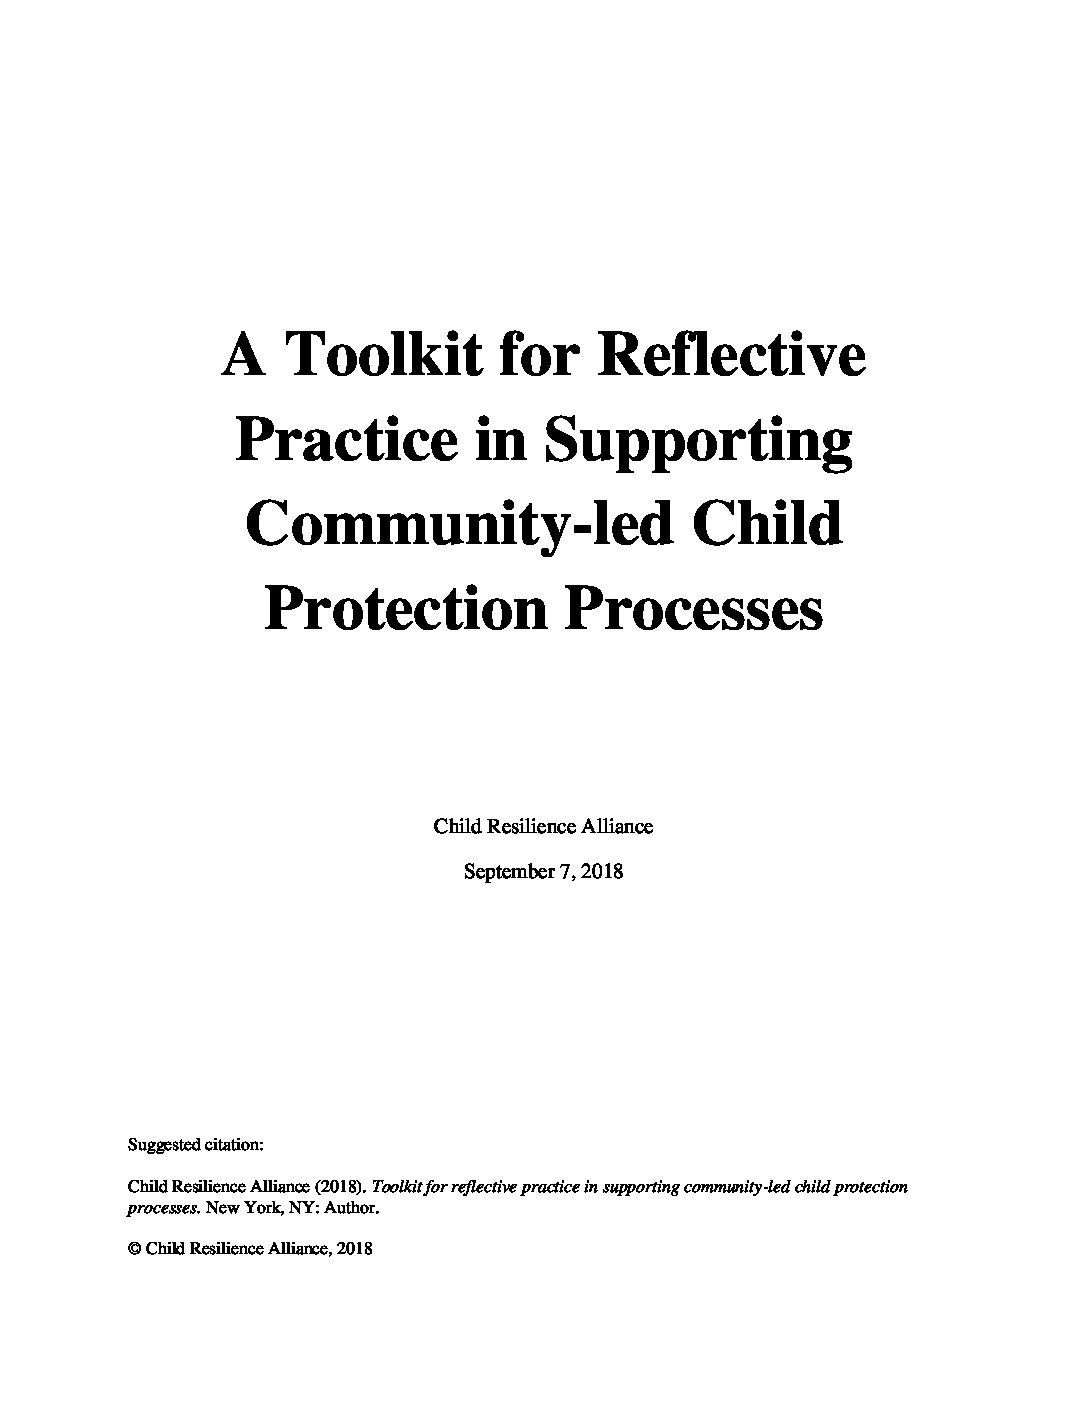 Photo of The Child Resilience Alliance’s Toolkit for Reflective Practice in Supporting Community-led Child Protection Processes